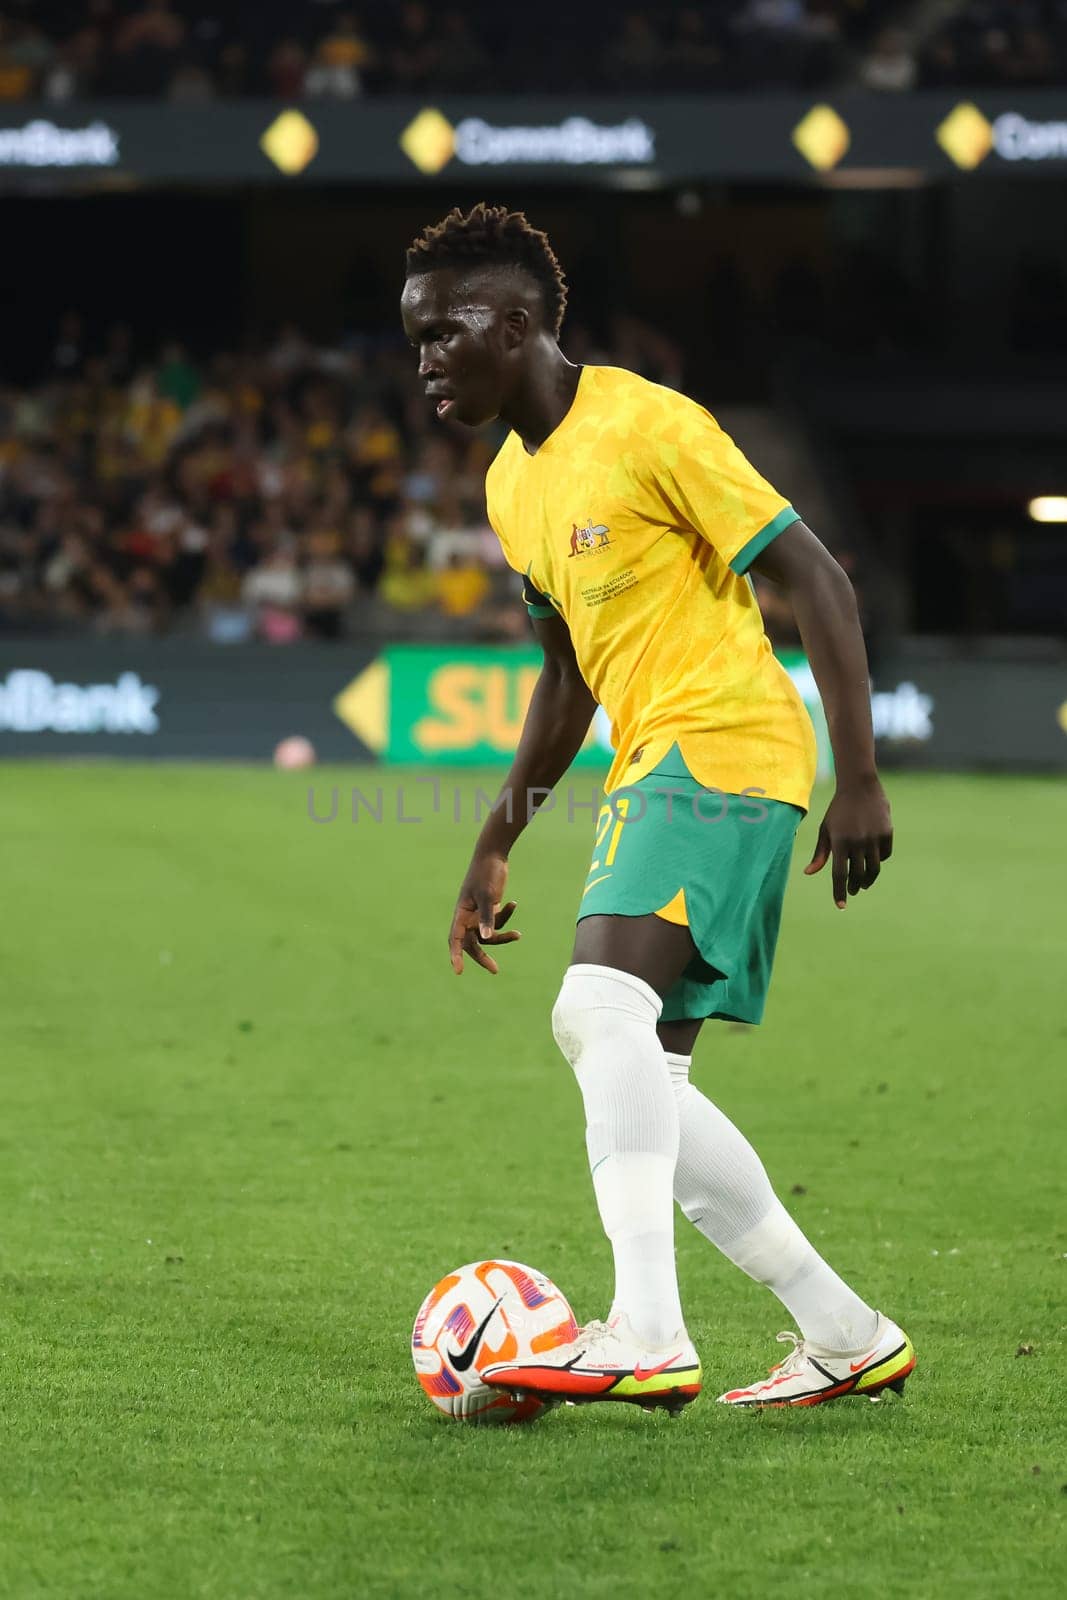 MELBOURNE, AUSTRALIA - MARCH 28: Garang Kuol of Australia during an international friendly match between the Australia Socceroos and Ecuador at Marvel Stadium on March 28, 2023 in Melbourne, Australia.